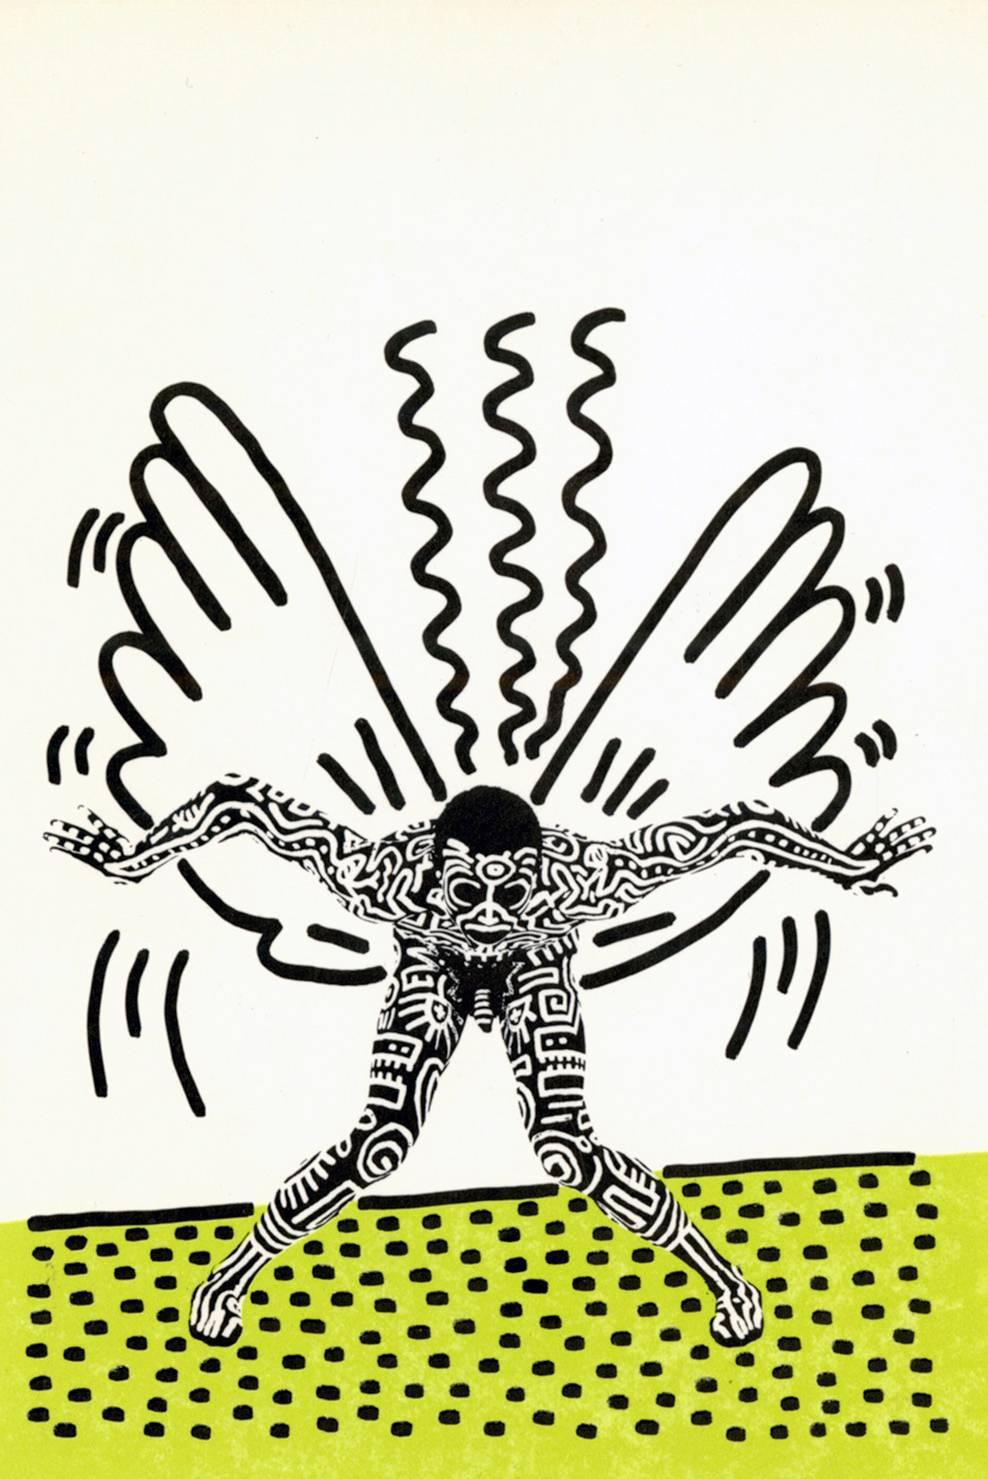 Keith Haring Bill T. Jones Into 84 (set of 3 Tony Shafrazi announcements) - Print by (after) Keith Haring